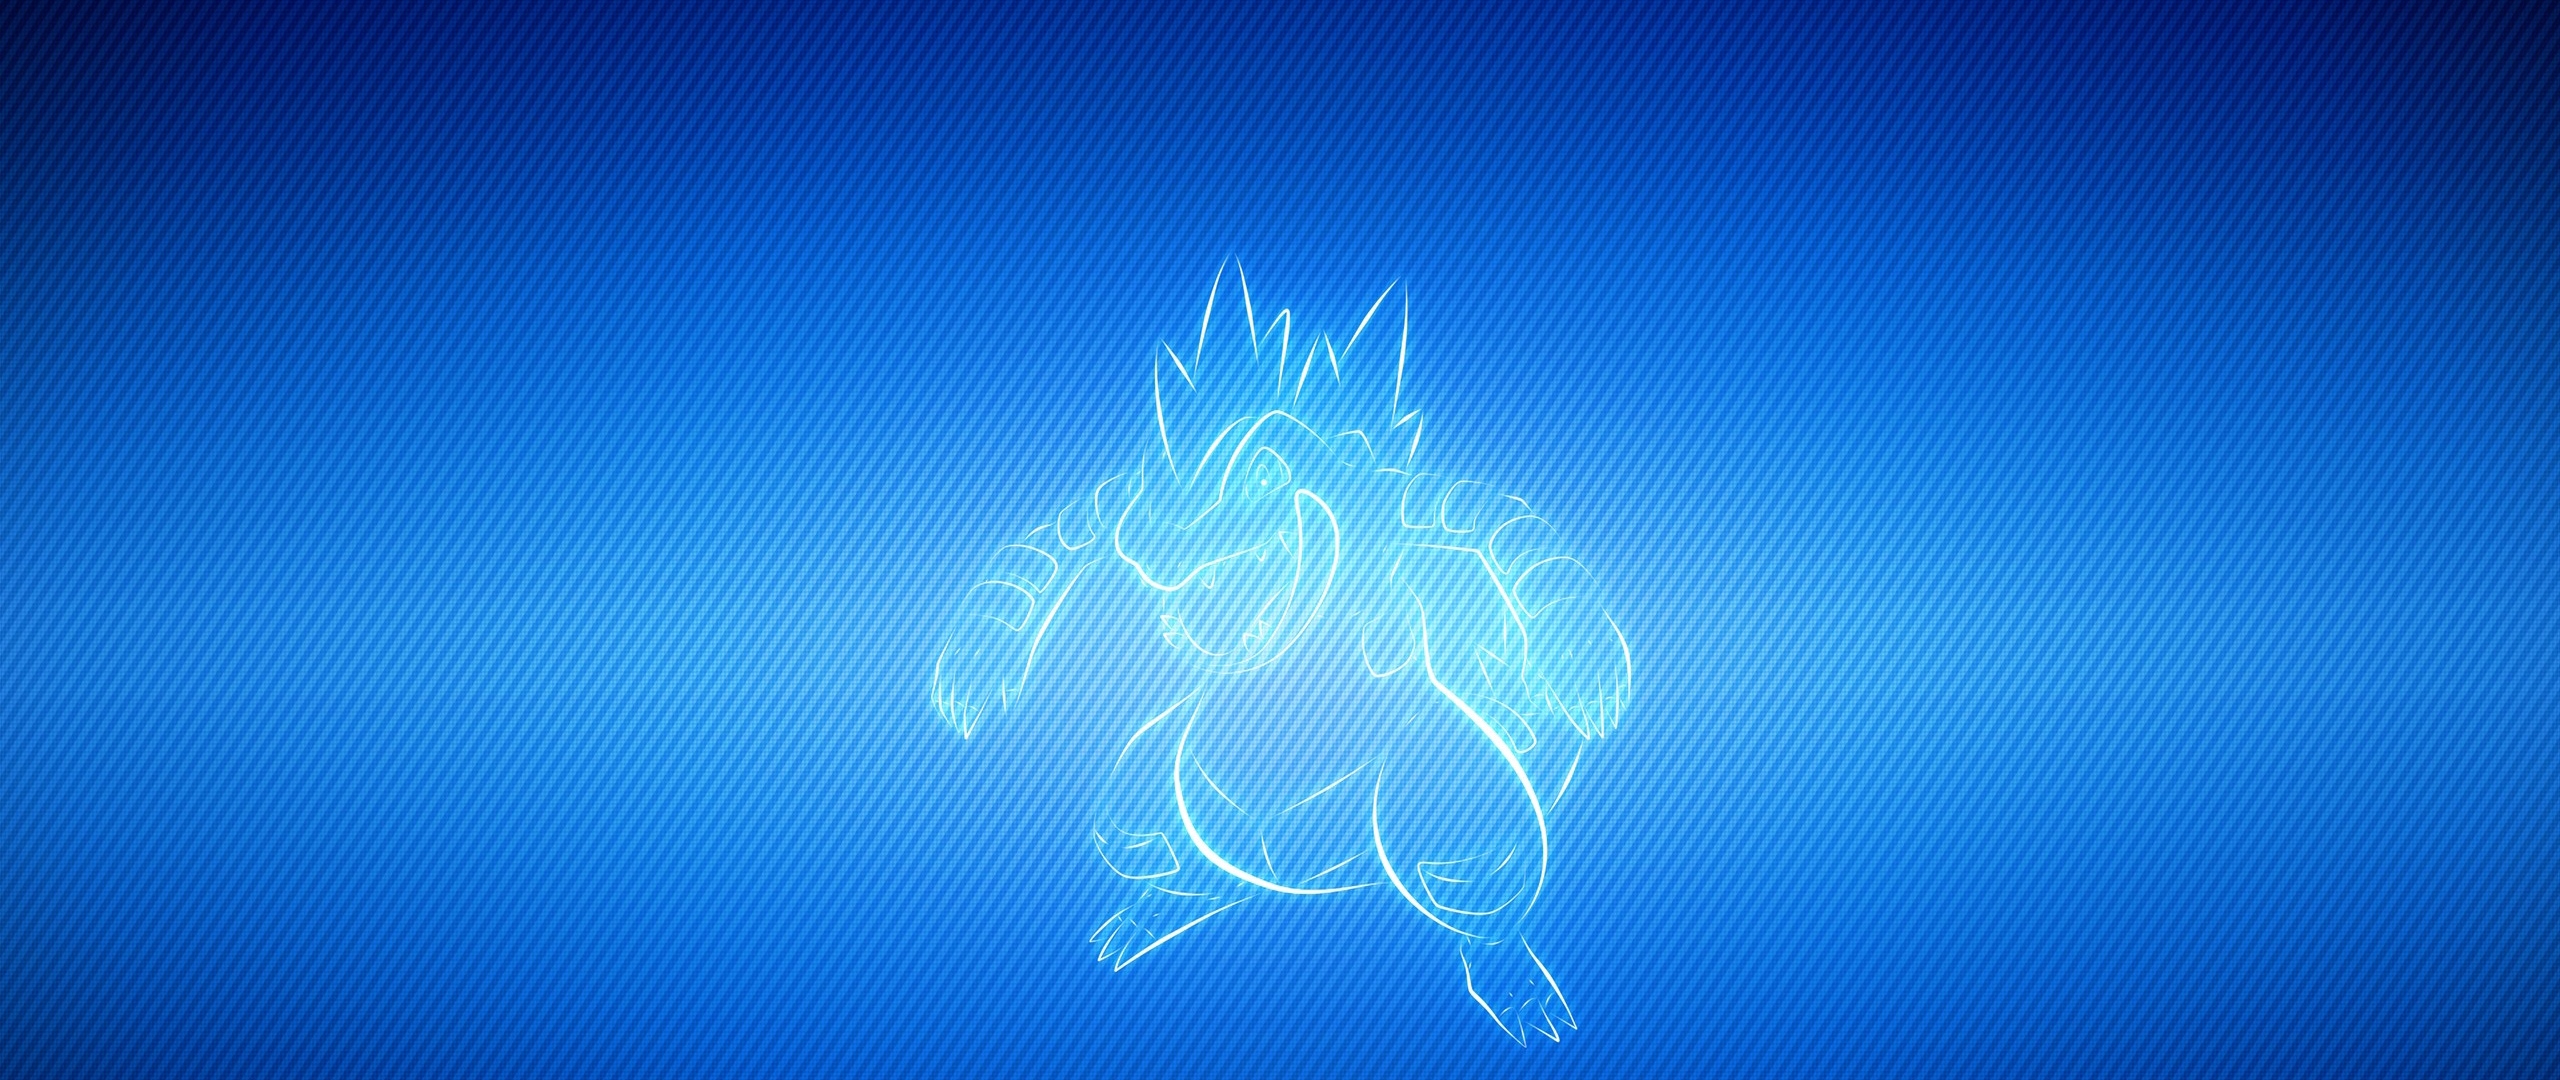 Feraligatr Wallpaper Image In Collection